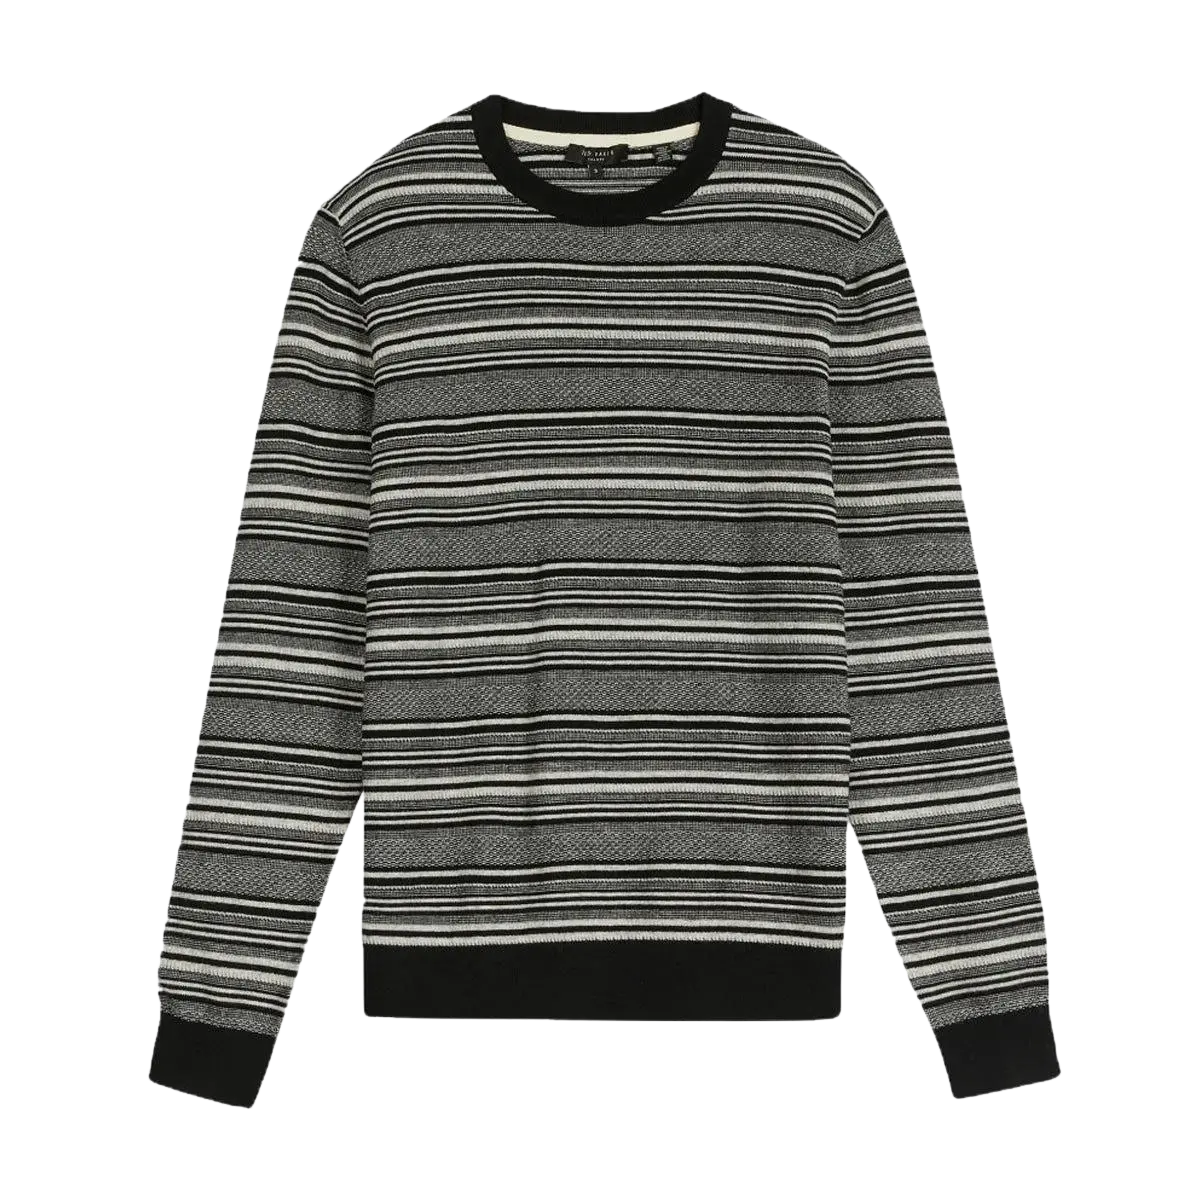 Ted Baker Lowther Long Sleeve Textured Crew Neck for Men